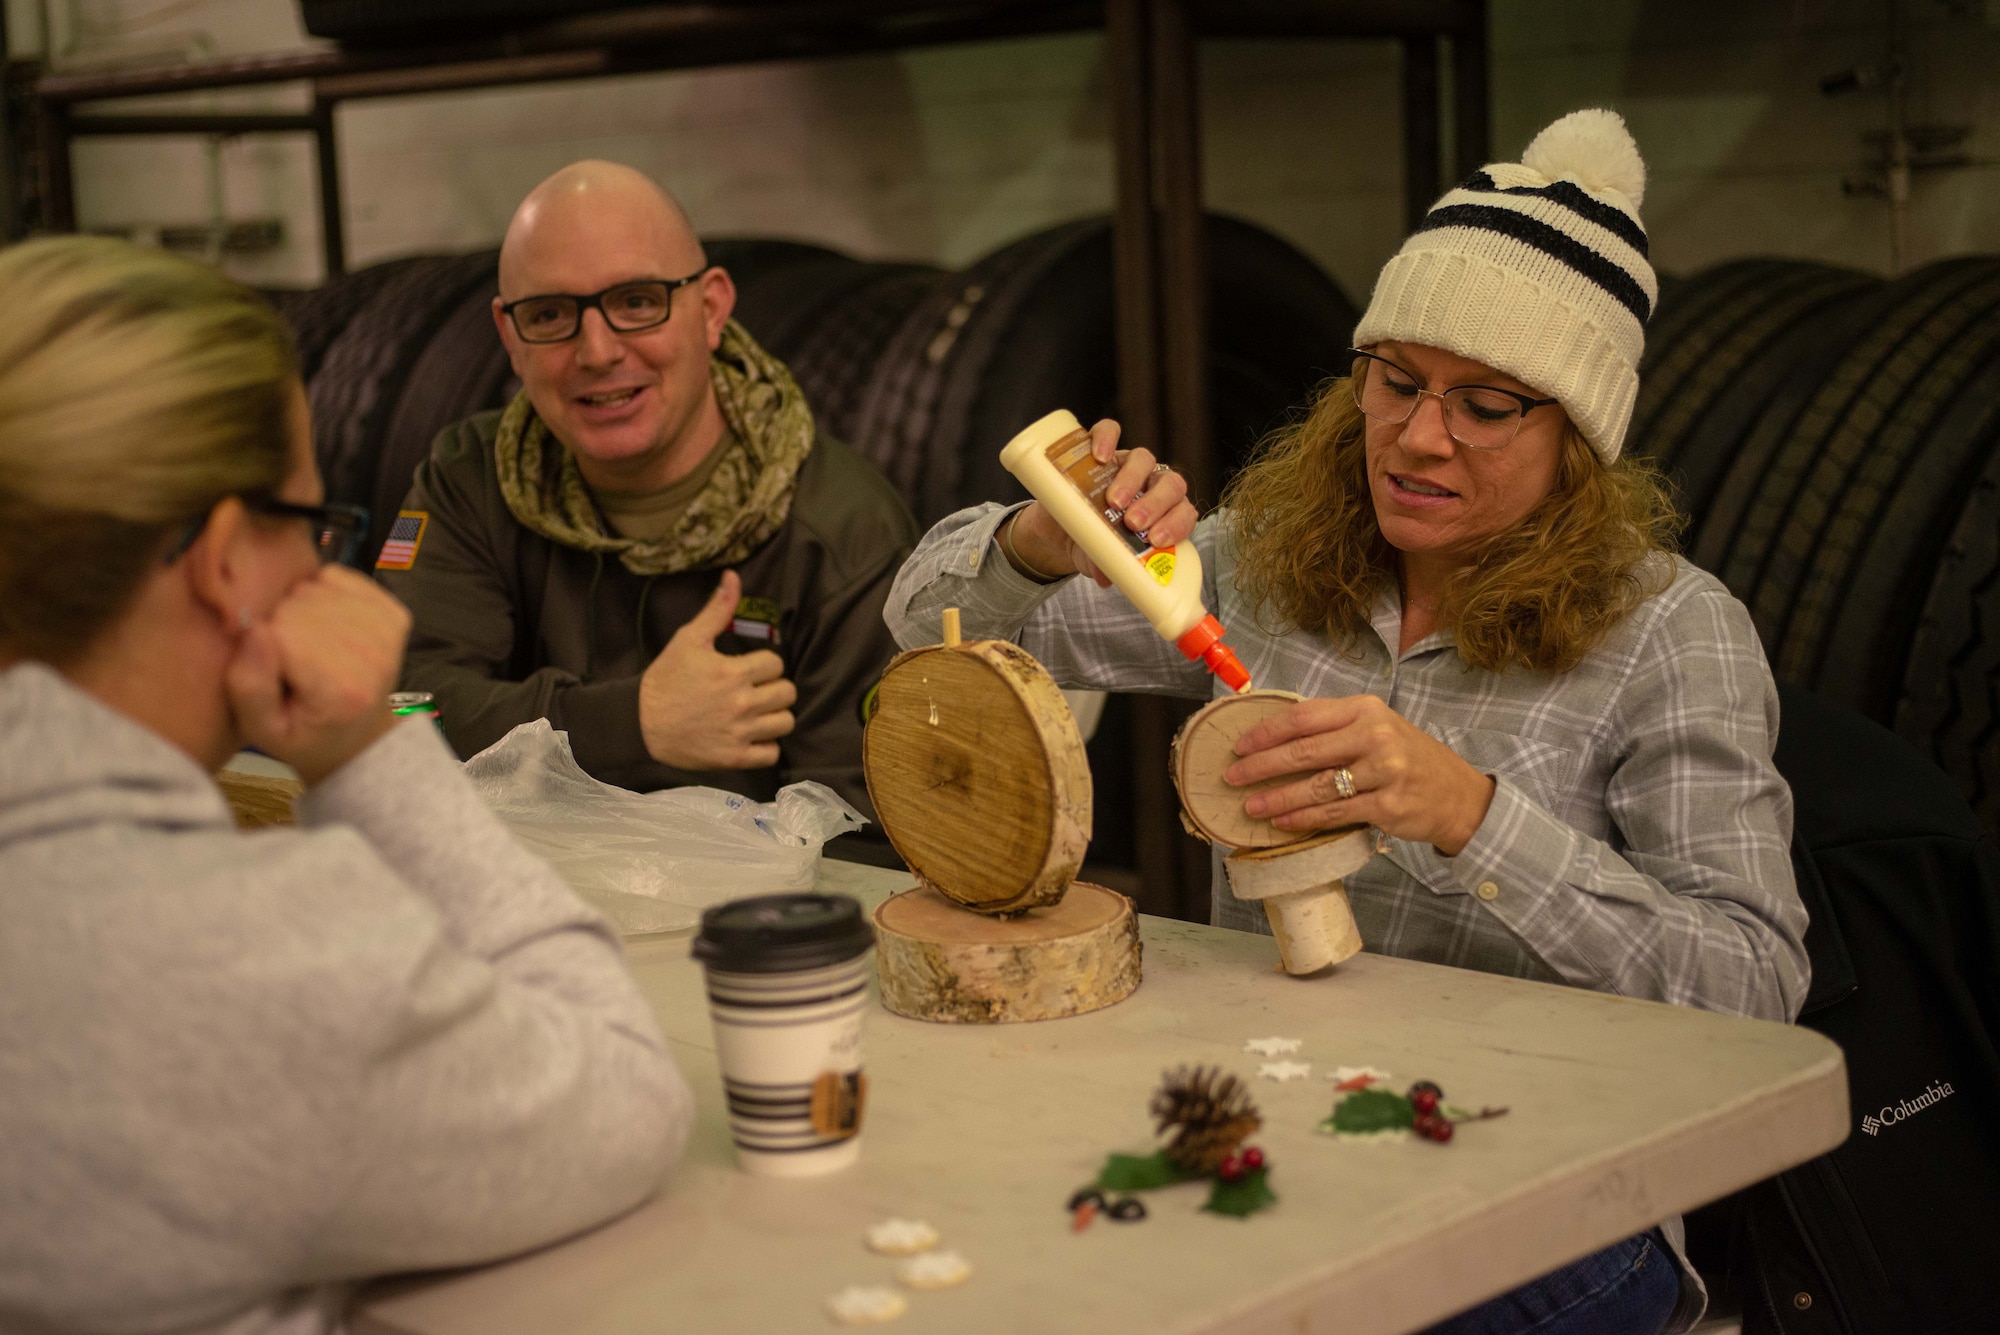 Airmen and families of the 354th Logistics Readiness Squadron build birch snowmen during a monthly squadron gathering, Nov. 7, 2019, at Eielson Air Force Base, Alaska. Attendees built both crafts and relationships while connecting with Air Force families. (U.S. Air Force photo by Capt. Kay NIssen)